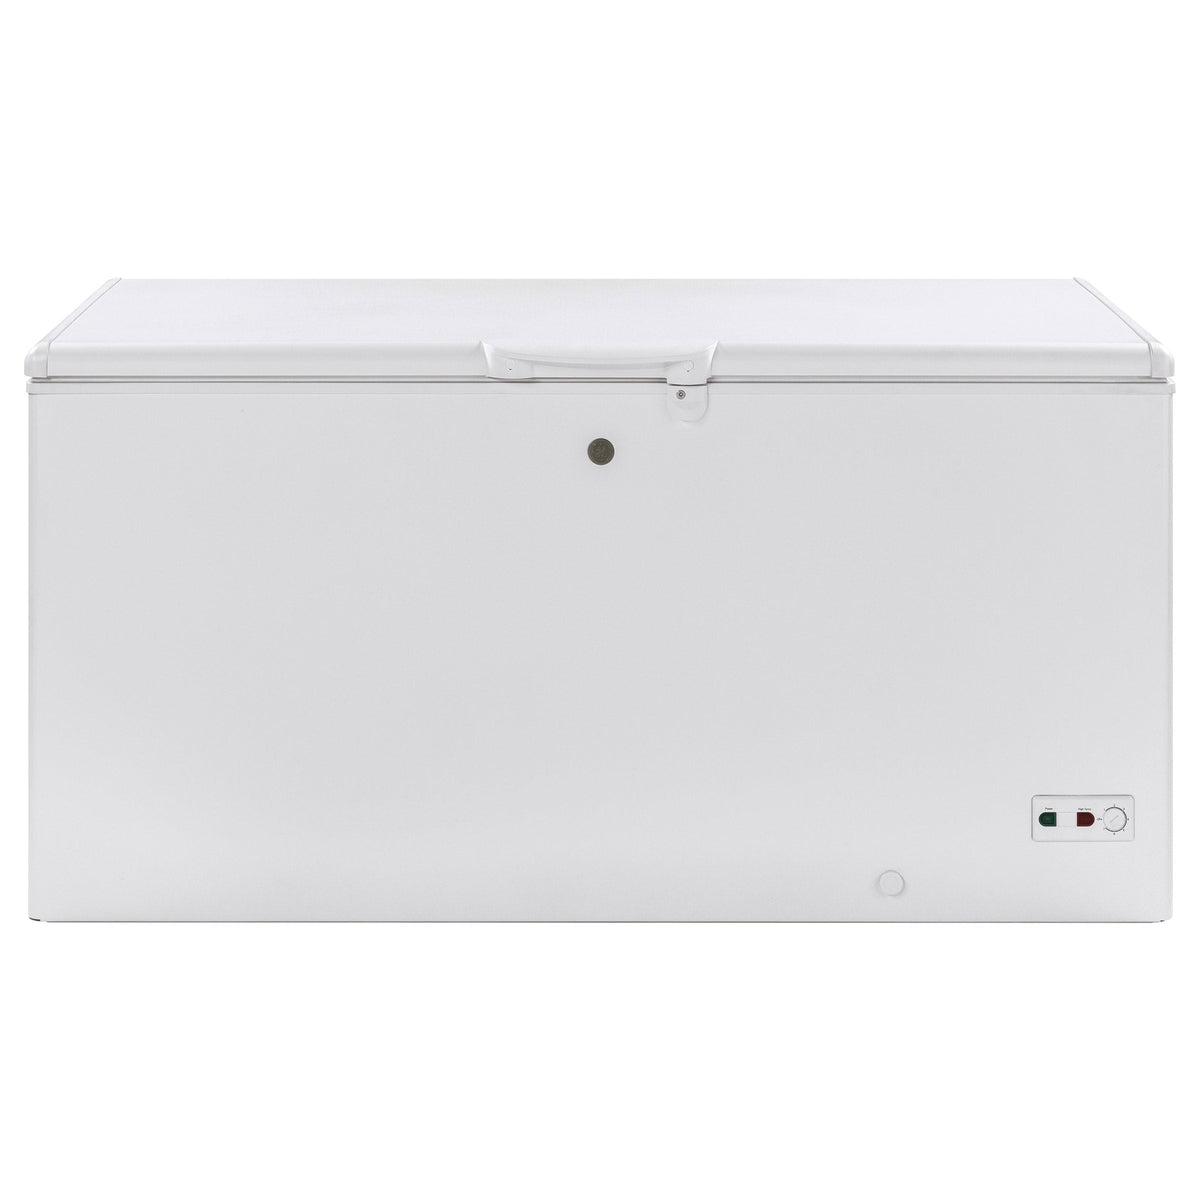 GE 15.7 cu. ft. Chest Freezer with 2 Bulk Slide-Out Baskets and Garage Ready Image